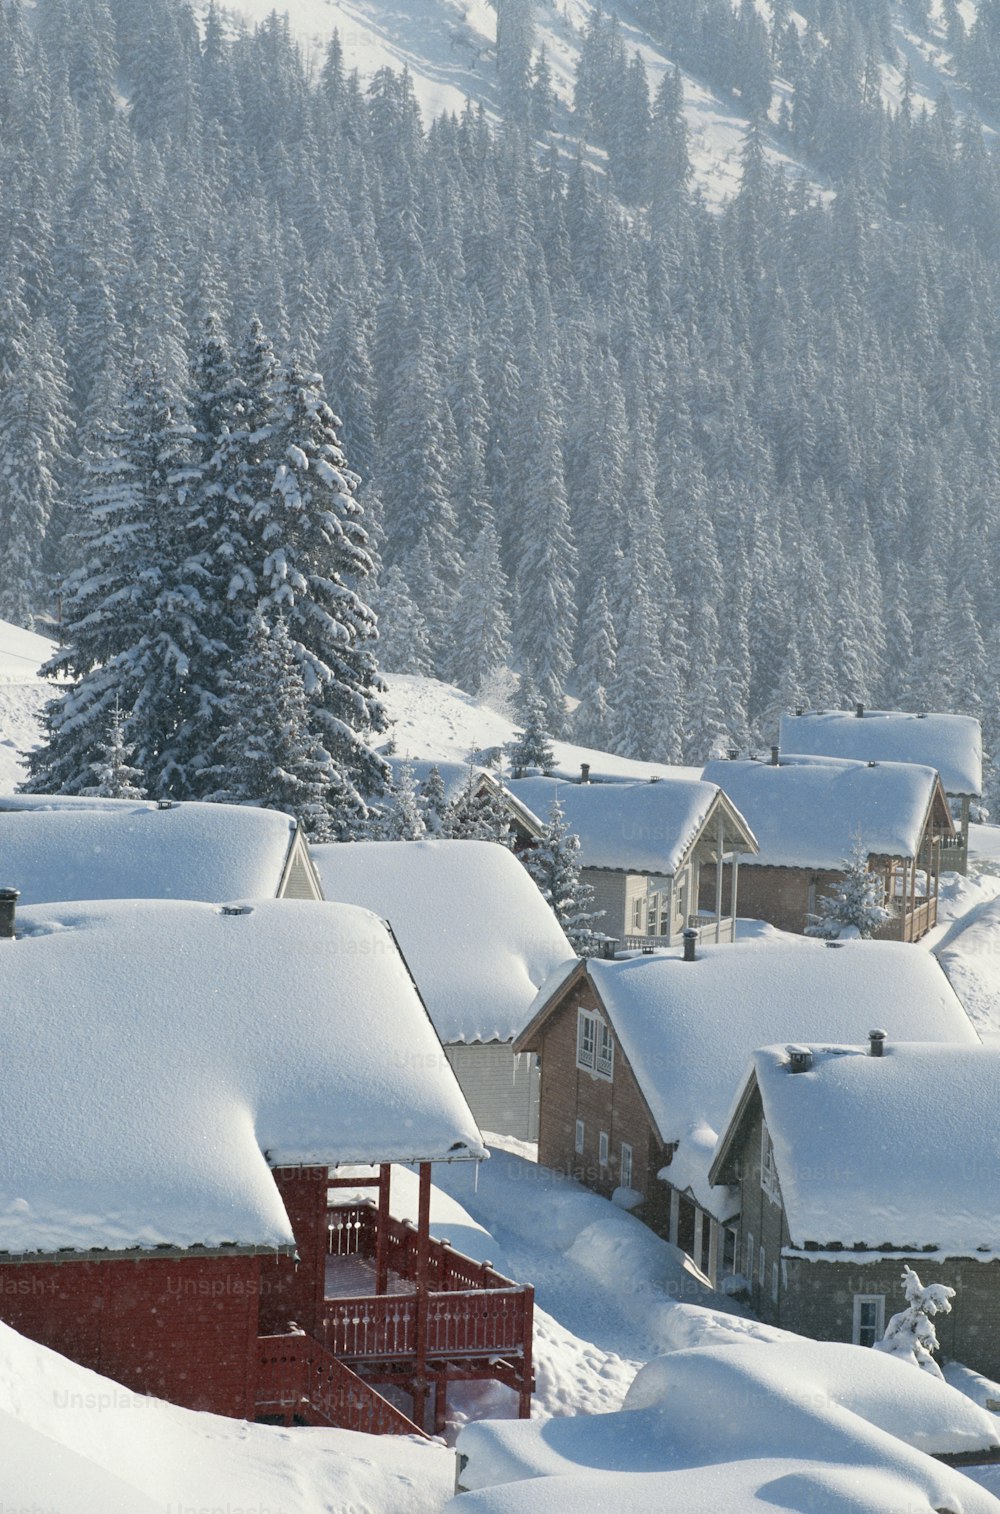 a group of houses covered in snow with trees in the background